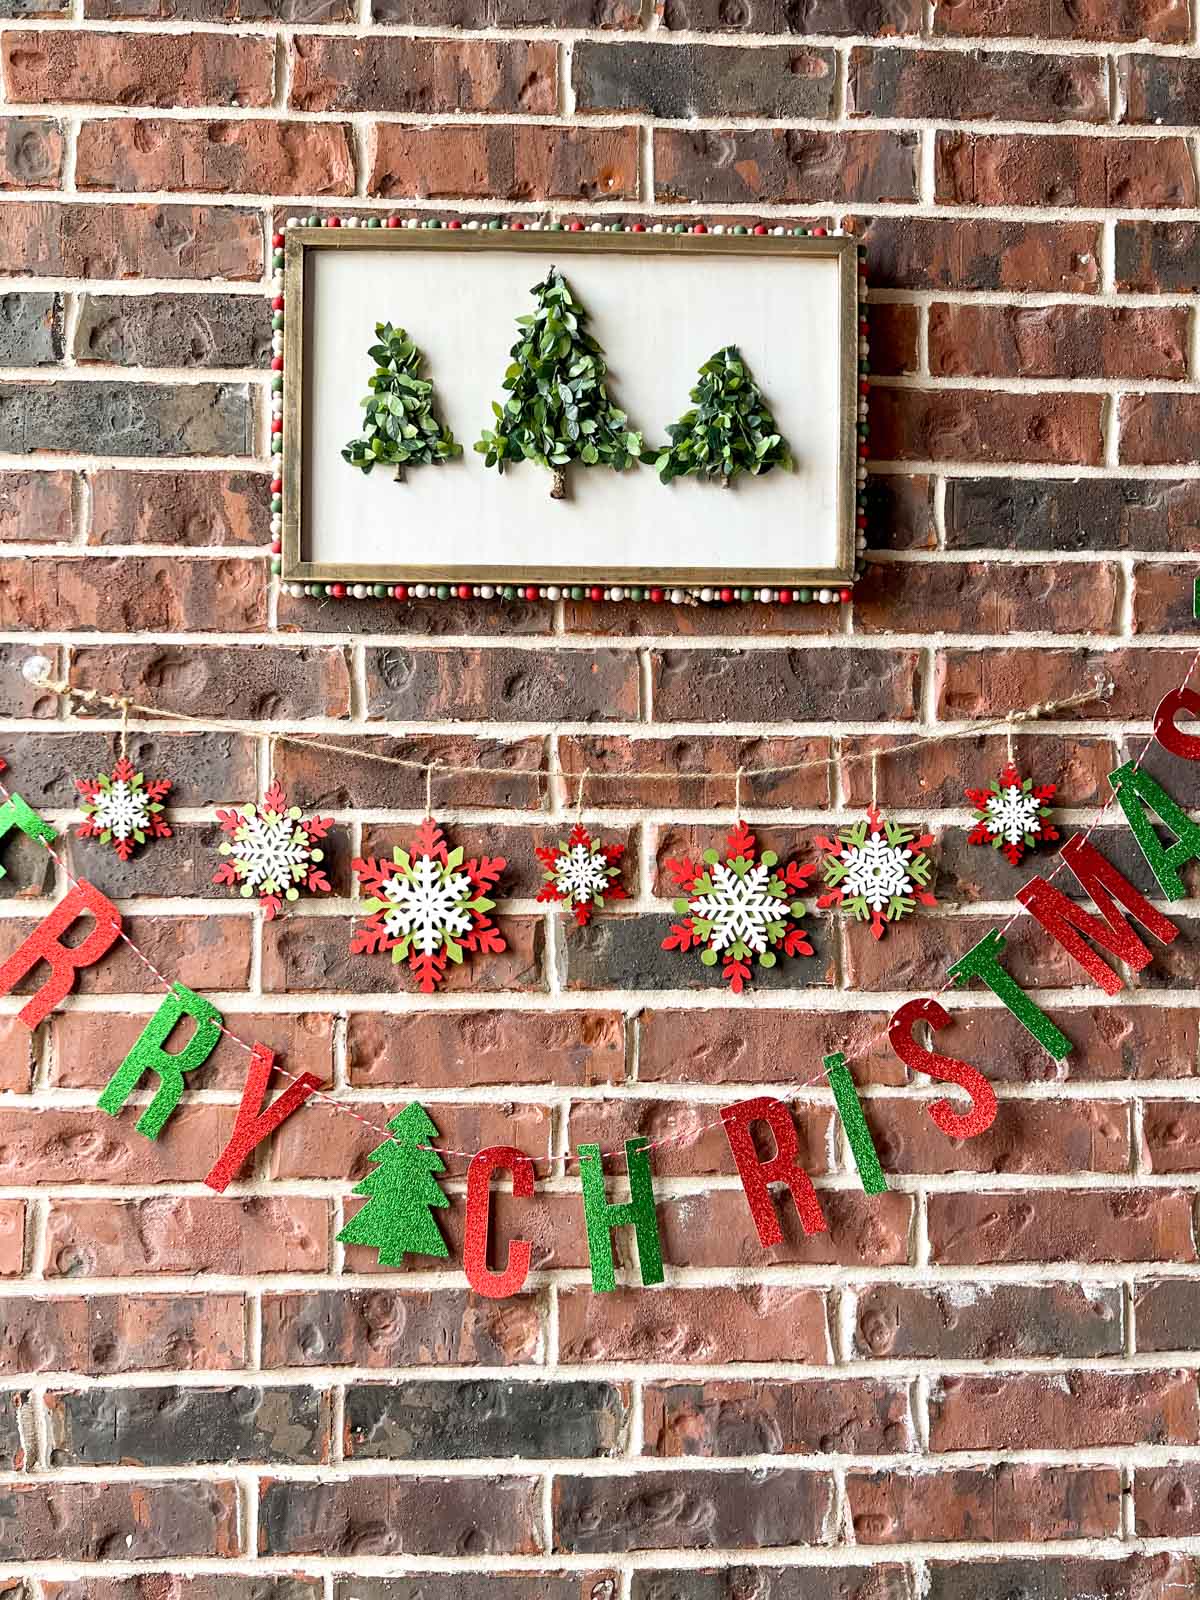 A wooden sign hanging on the wall that has 3 triangle shaped christmas tree made from greenery. The frame has christmas colored beads on the outside. Below the sign is a colored snowflake garland and a glittered "Merry Christmas" banner.